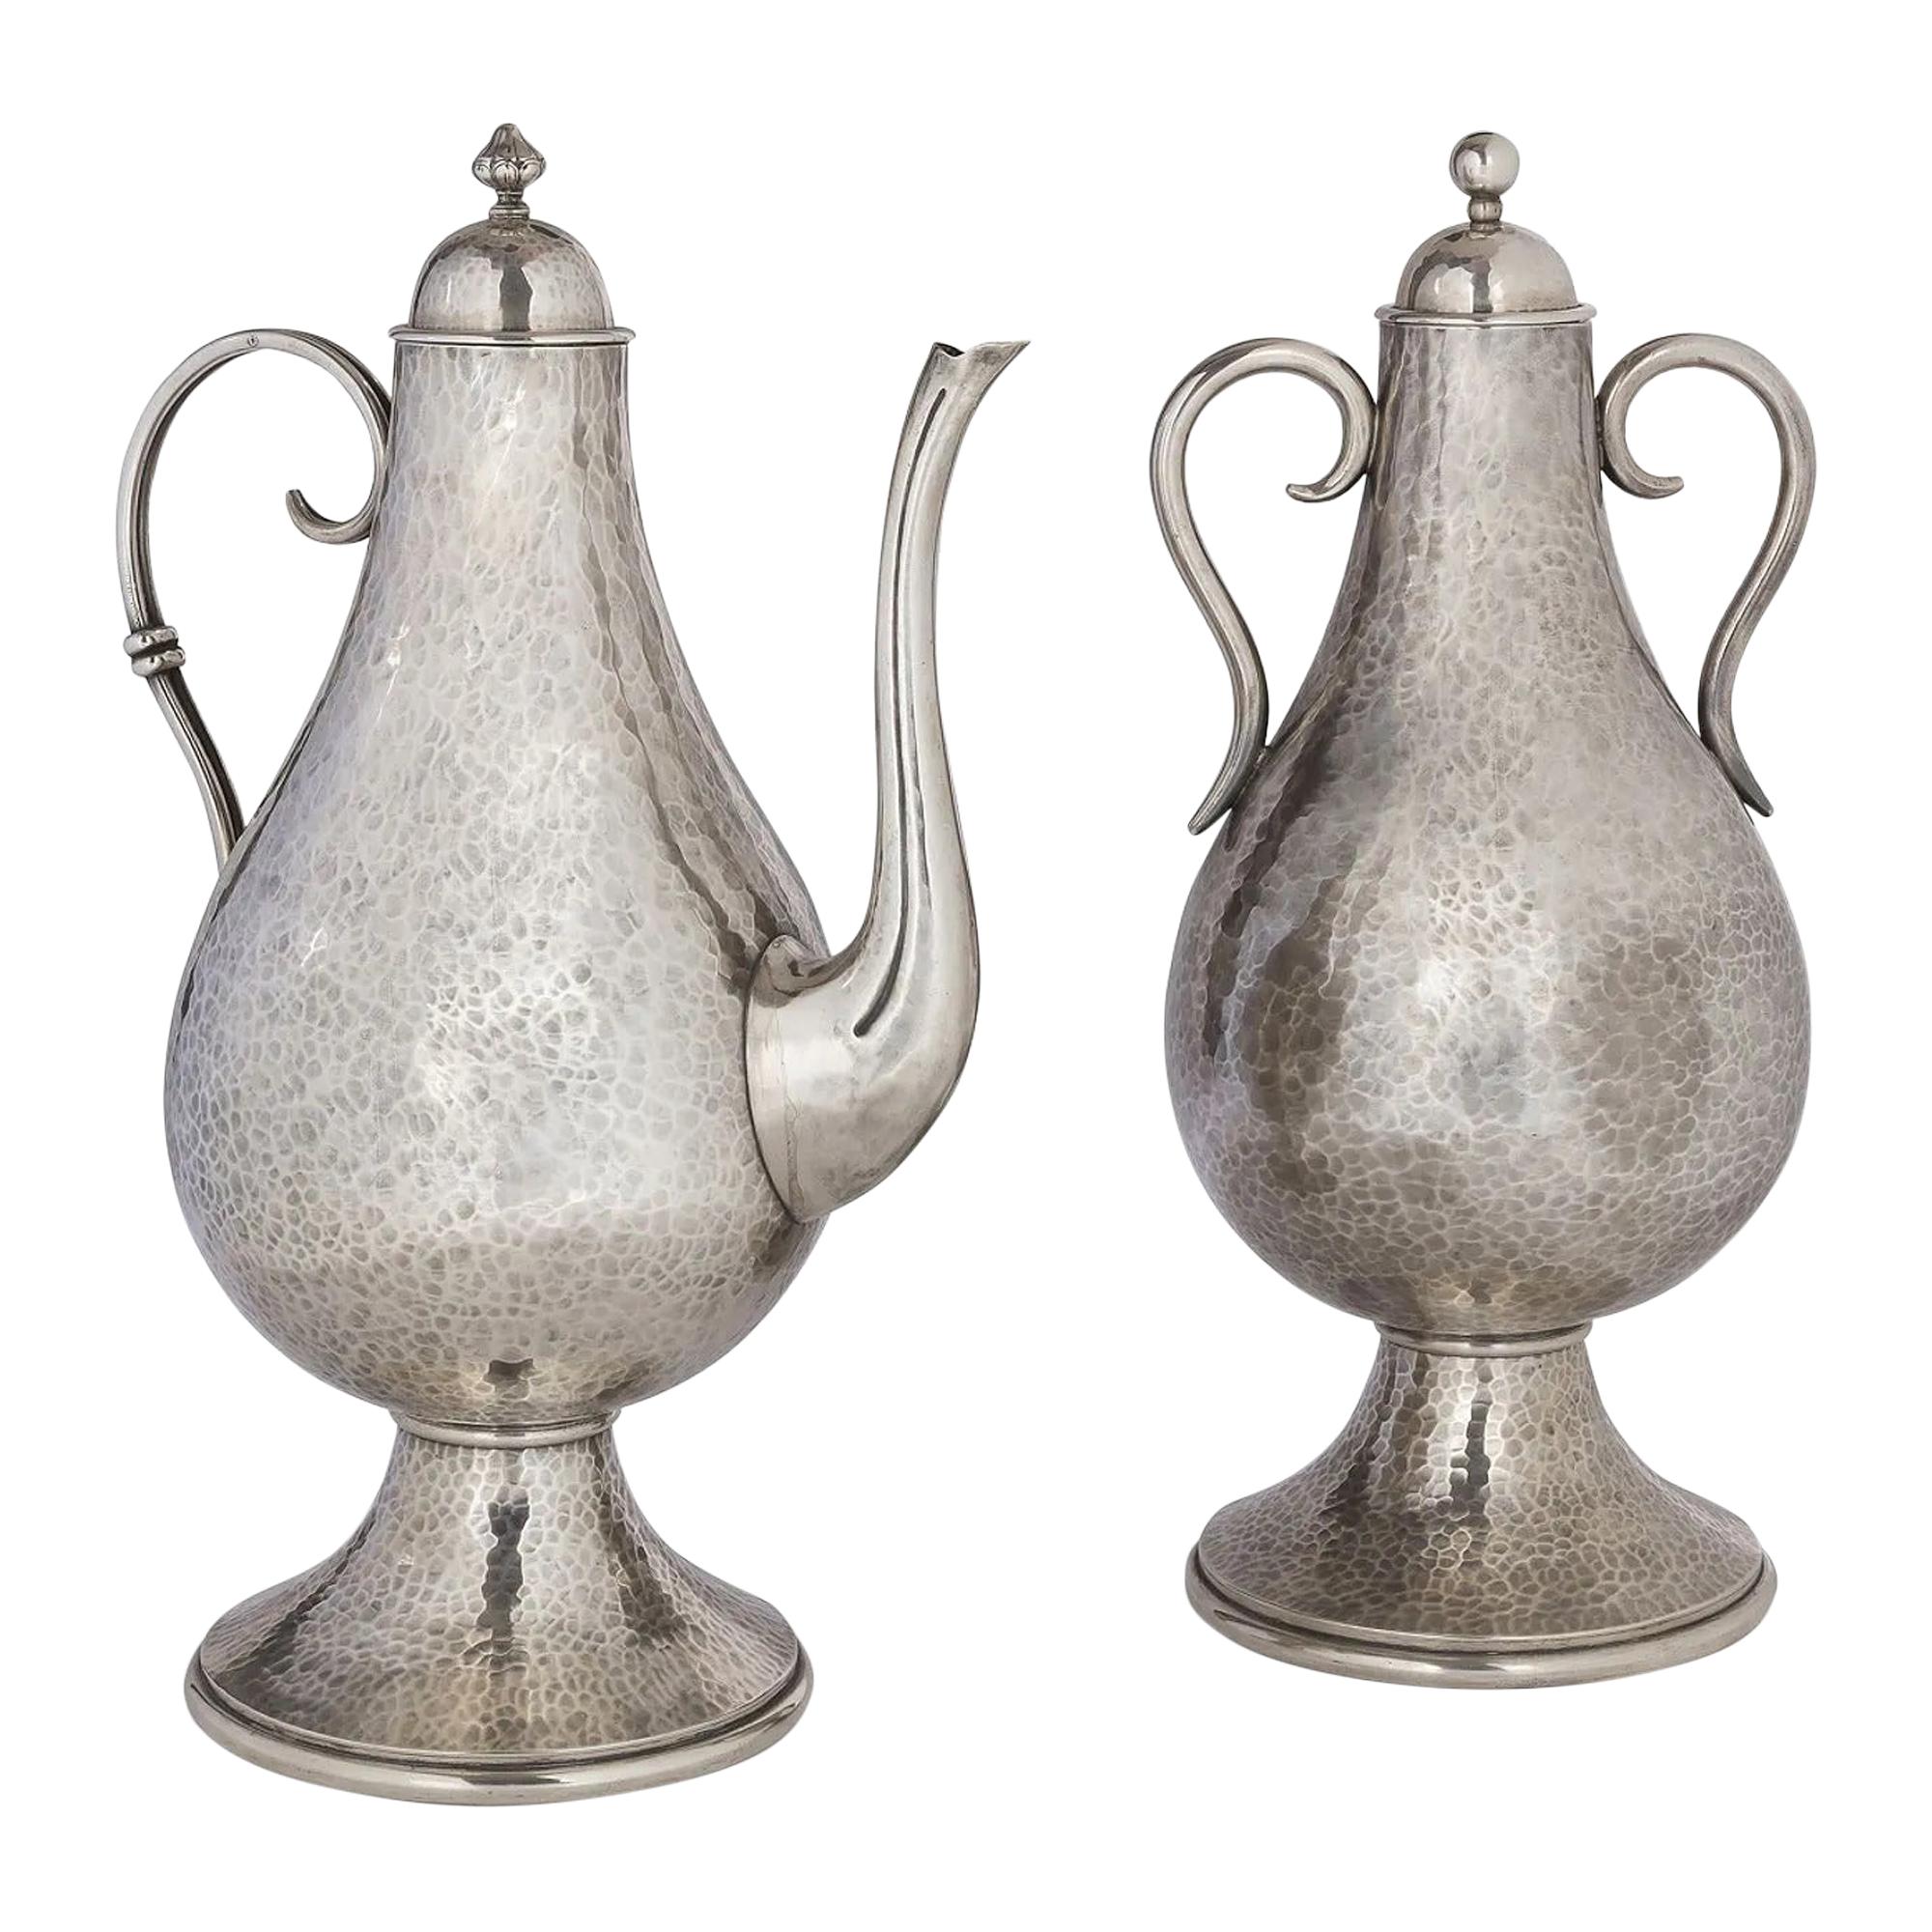 Jean Despres Covered Urn and a Jug Treated in the Ottoman Style, circa 1930 For Sale